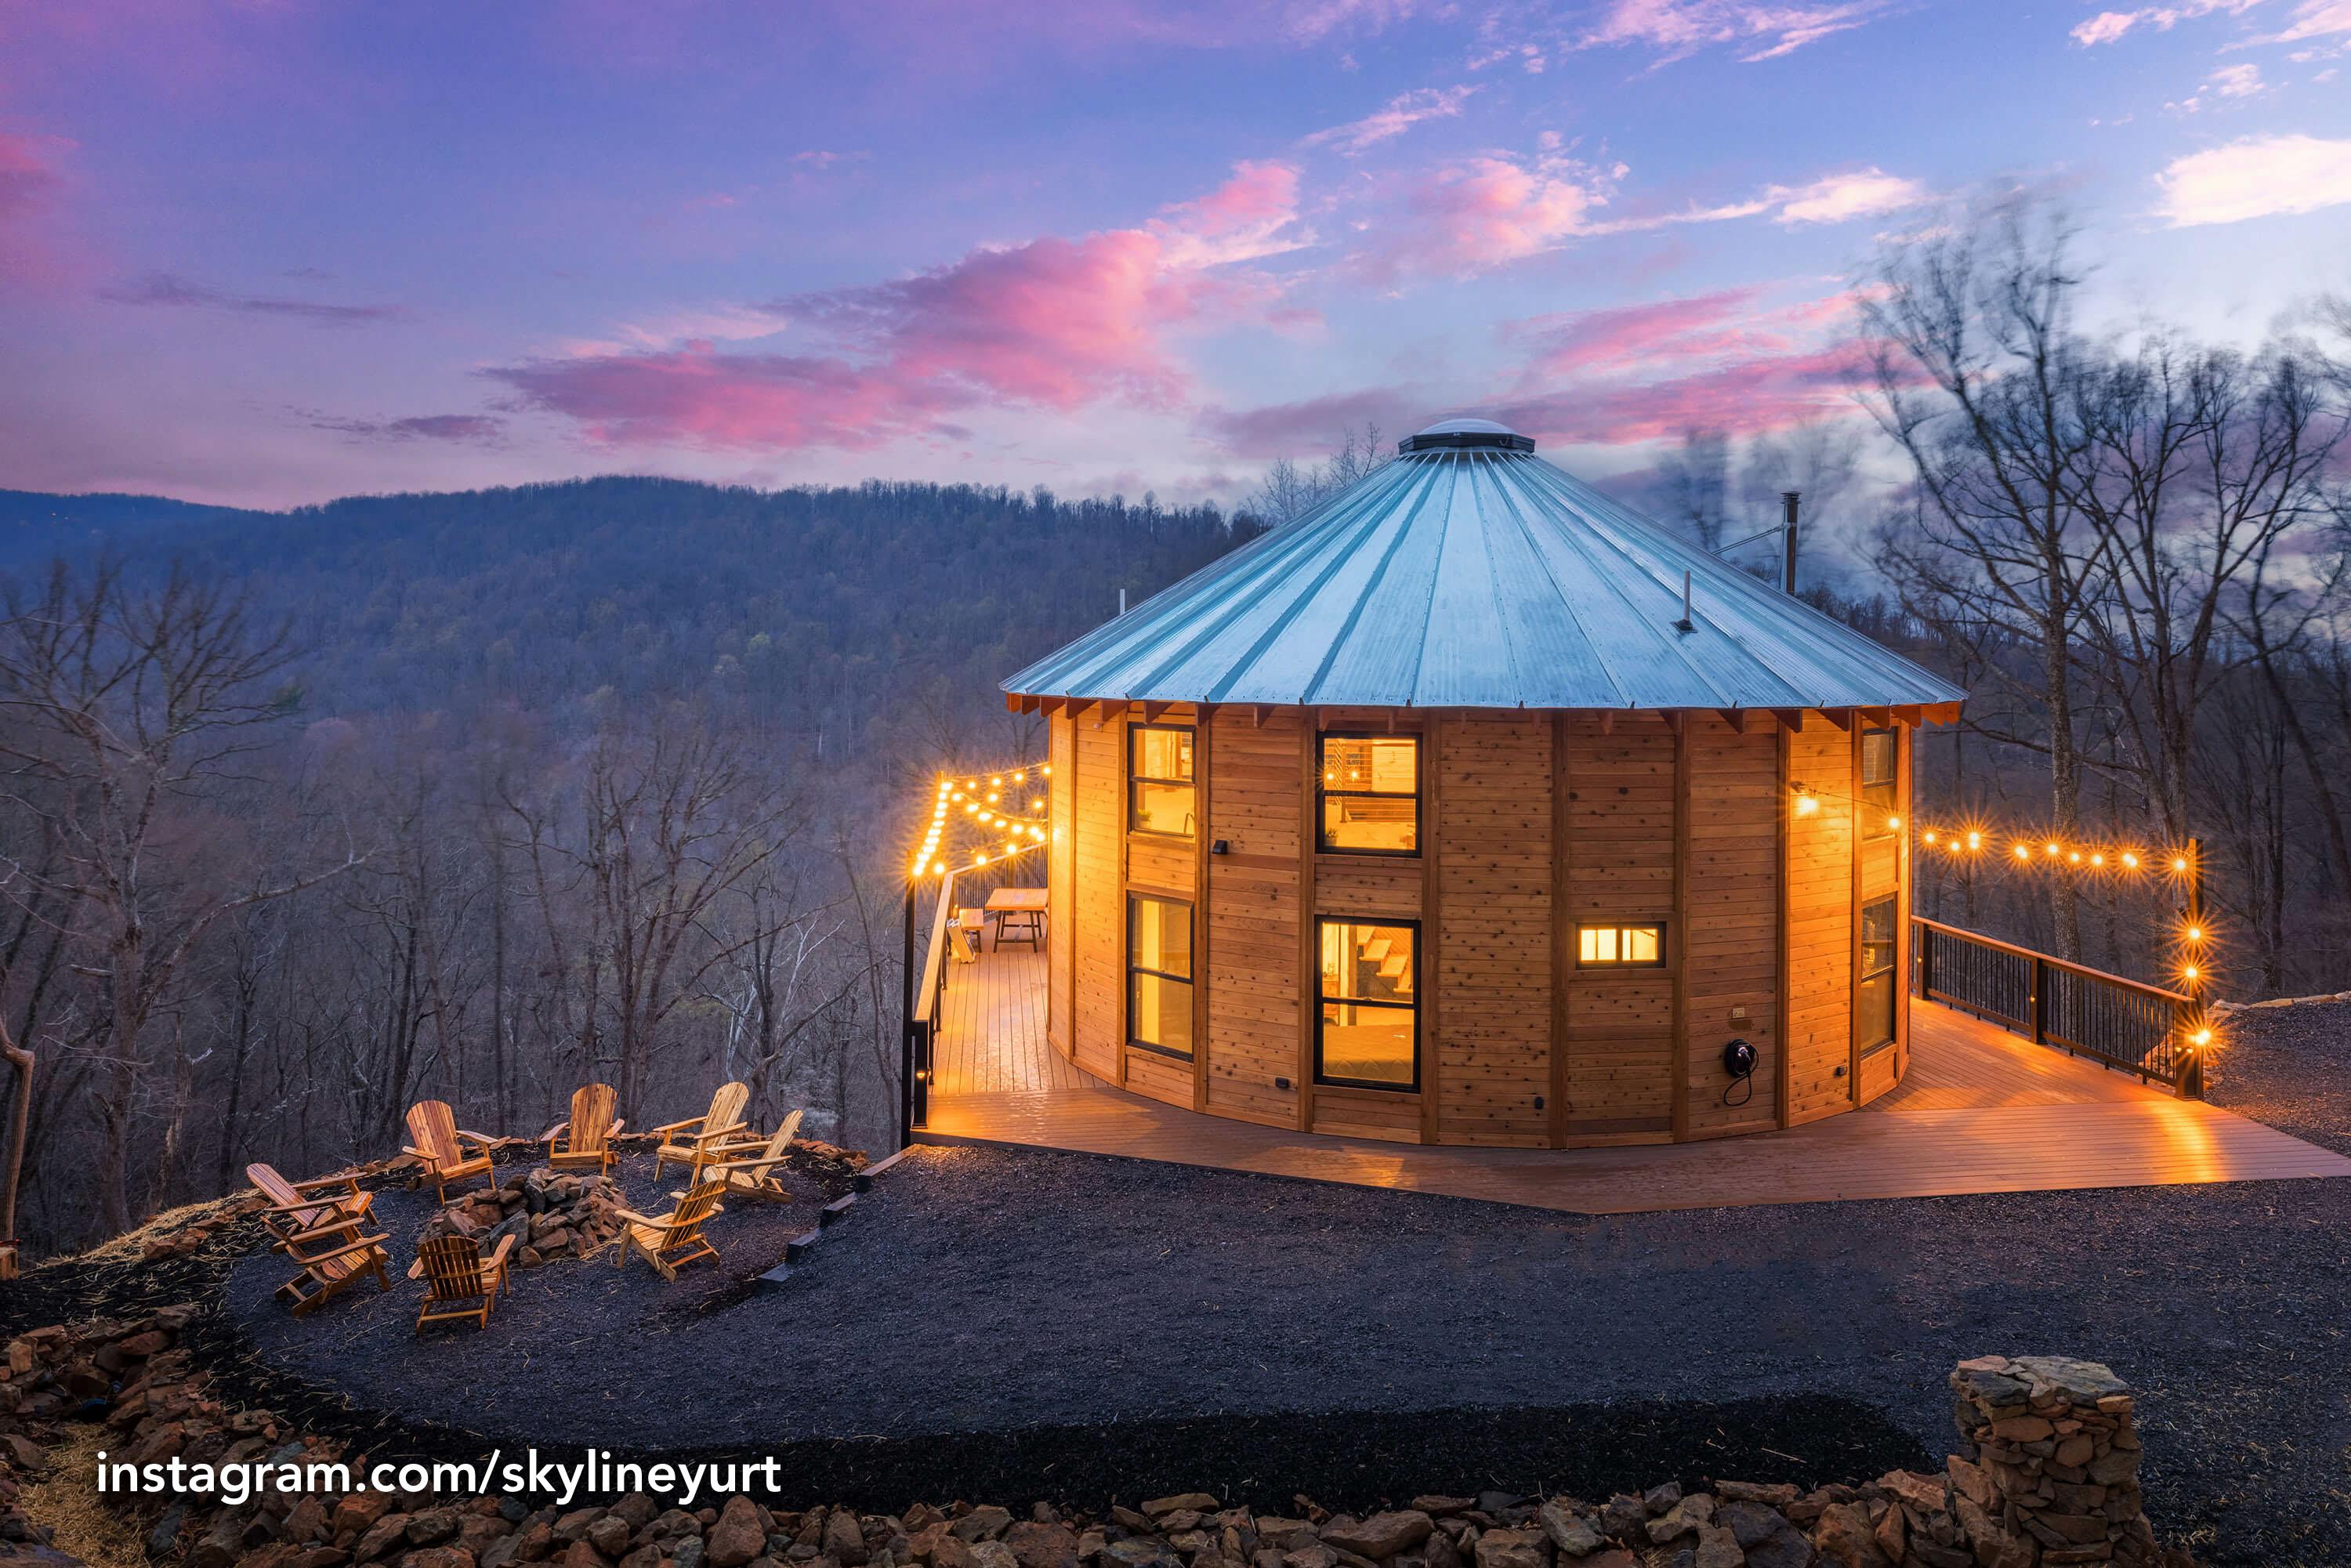 Skyline Yurt - A cabin-like two-story yurt on a wraparound deck with a hot tub, archery, wood stove, firepit, and all the modern amenities only an hour from Washington DC